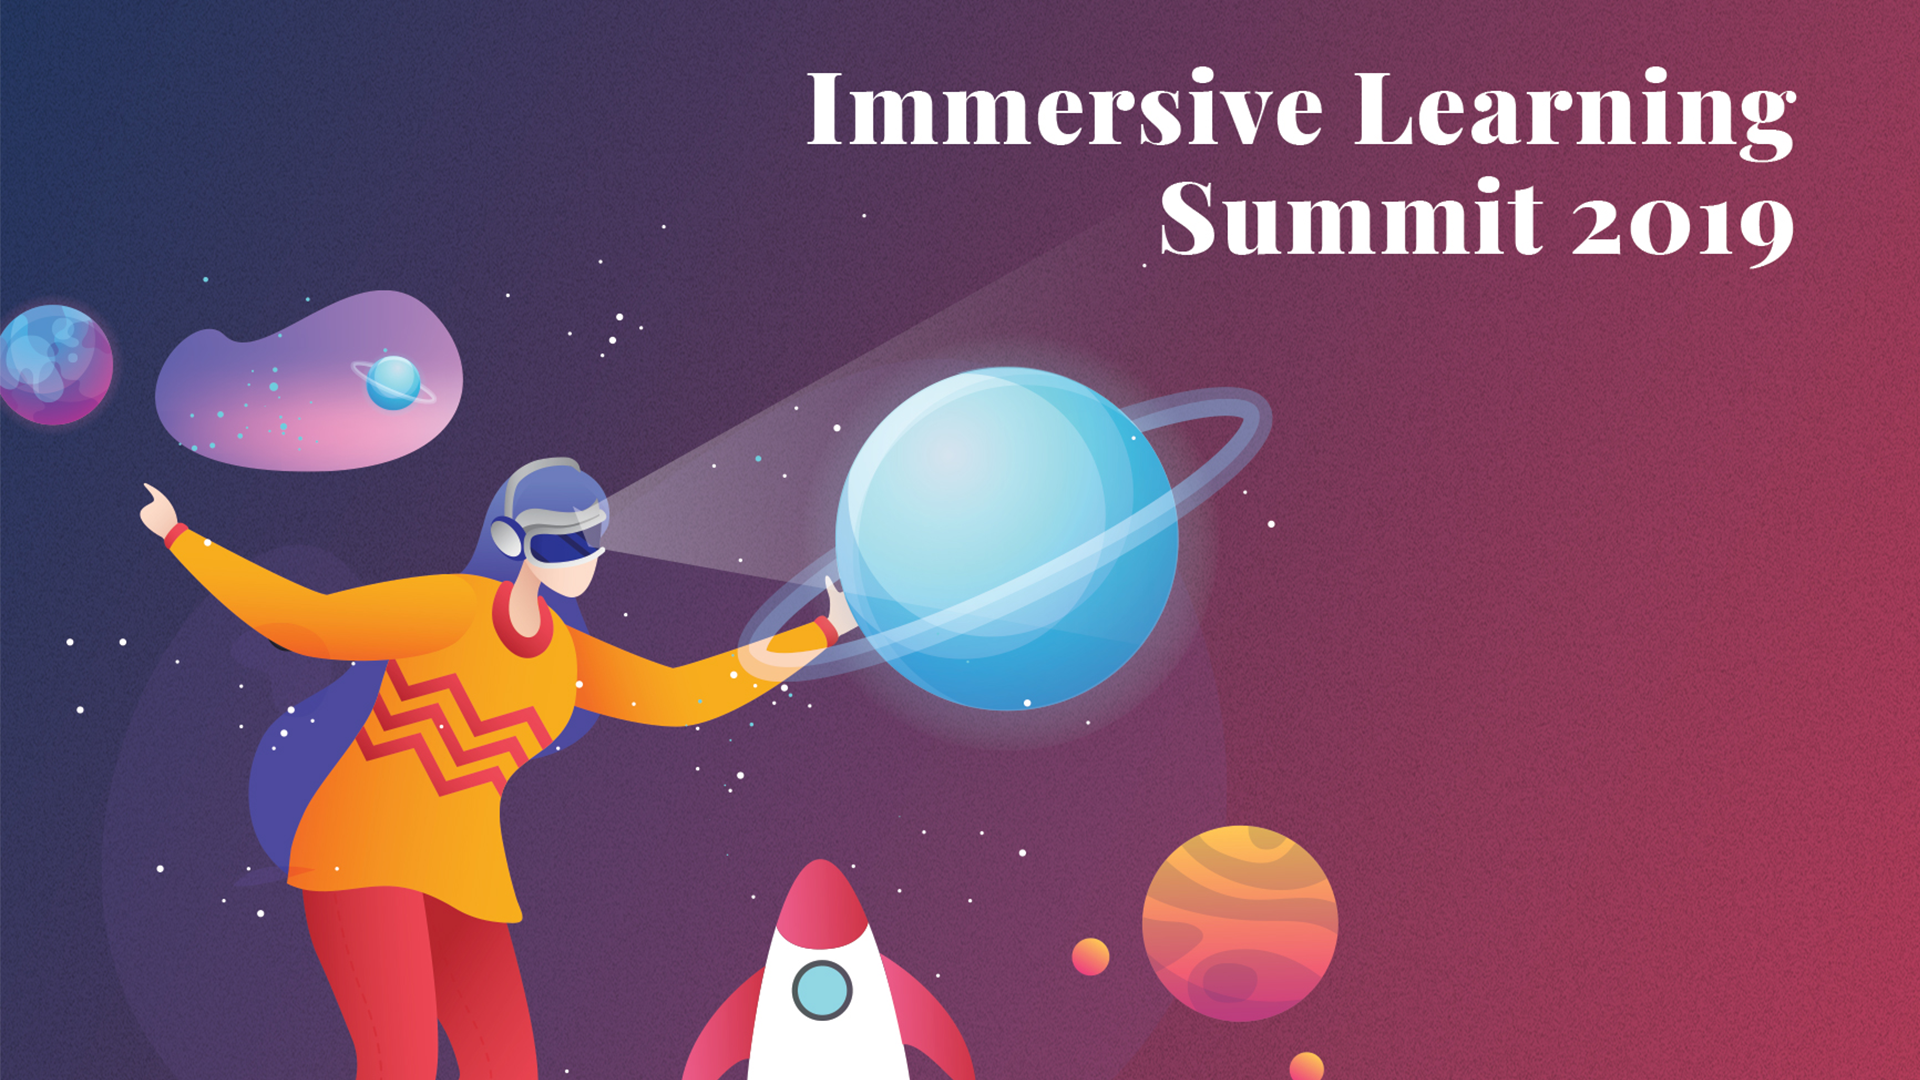 Drive Value in Technology Clusters – Attend our Immersive Learning Summit